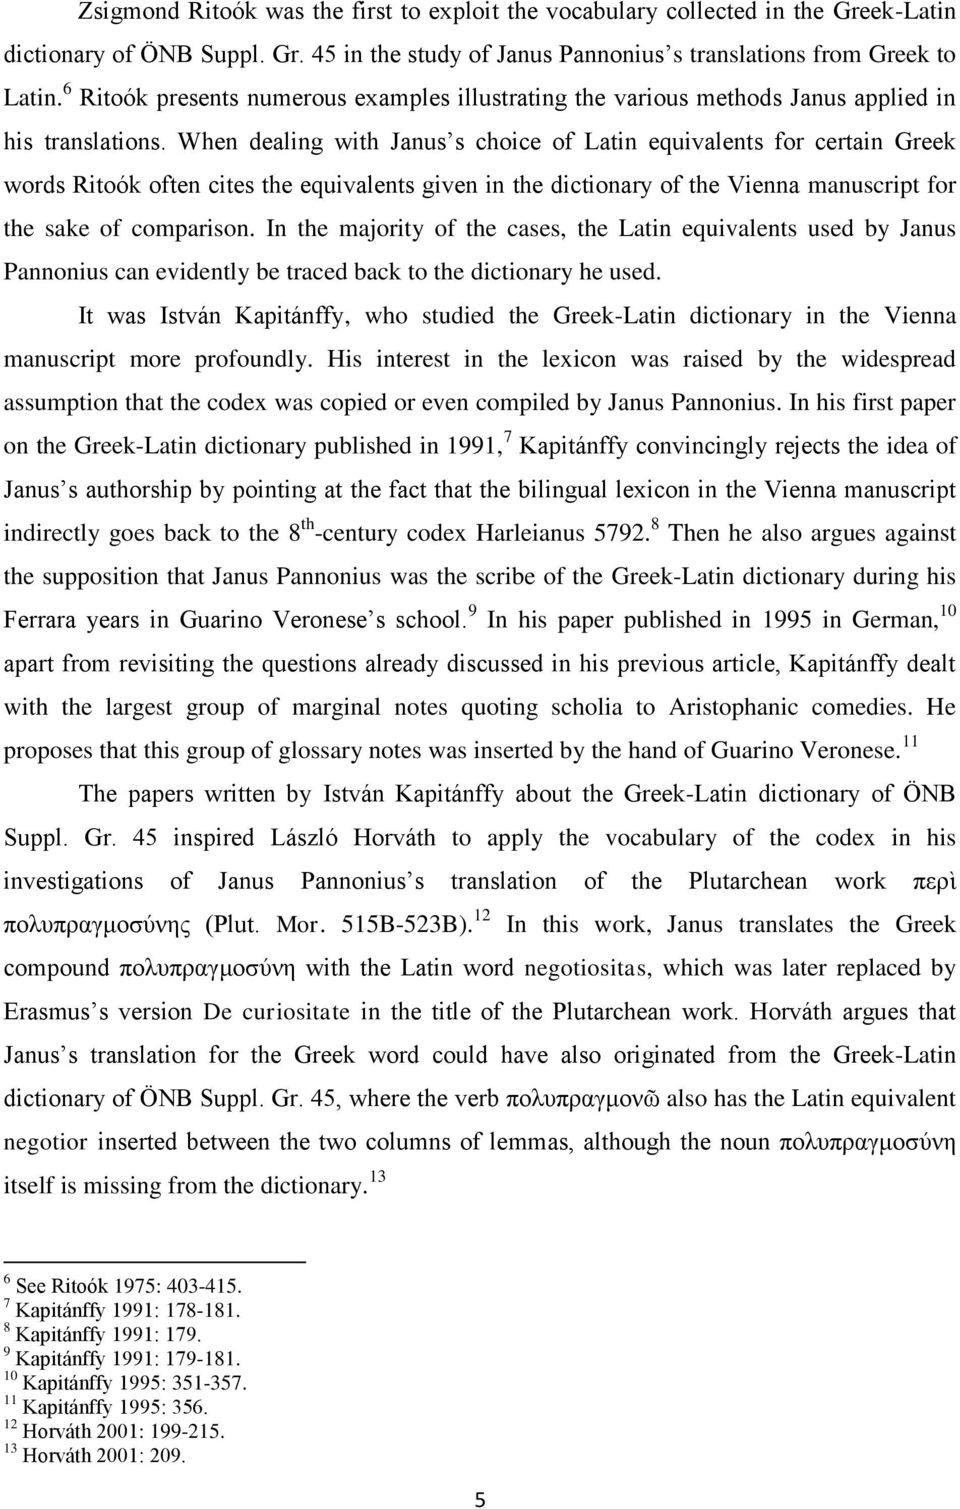 When dealing with Janus s choice of Latin equivalents for certain Greek words Ritoók often cites the equivalents given in the dictionary of the Vienna manuscript for the sake of comparison.